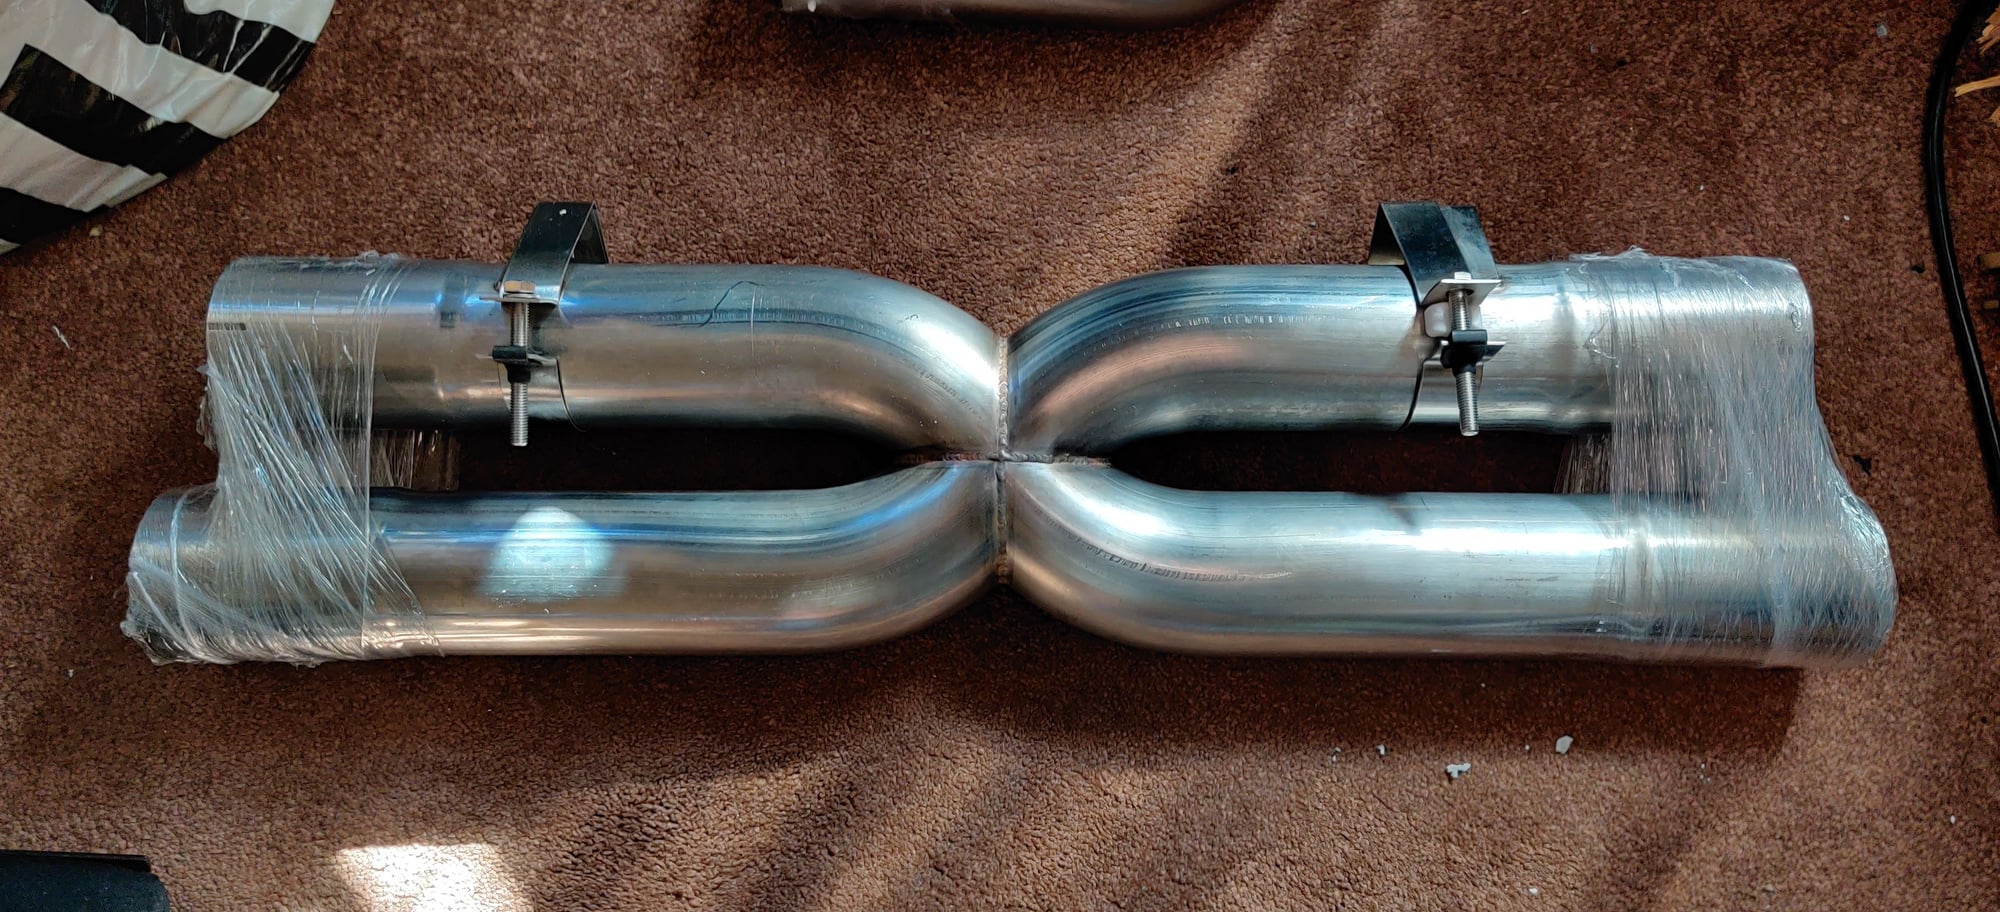 SpeedTech Competition 3.0 Muffler Delete X-Pipe w/ Cat Bypass Pipes 991  Turbo 3 76mm - Rennlist - Porsche Discussion Forums